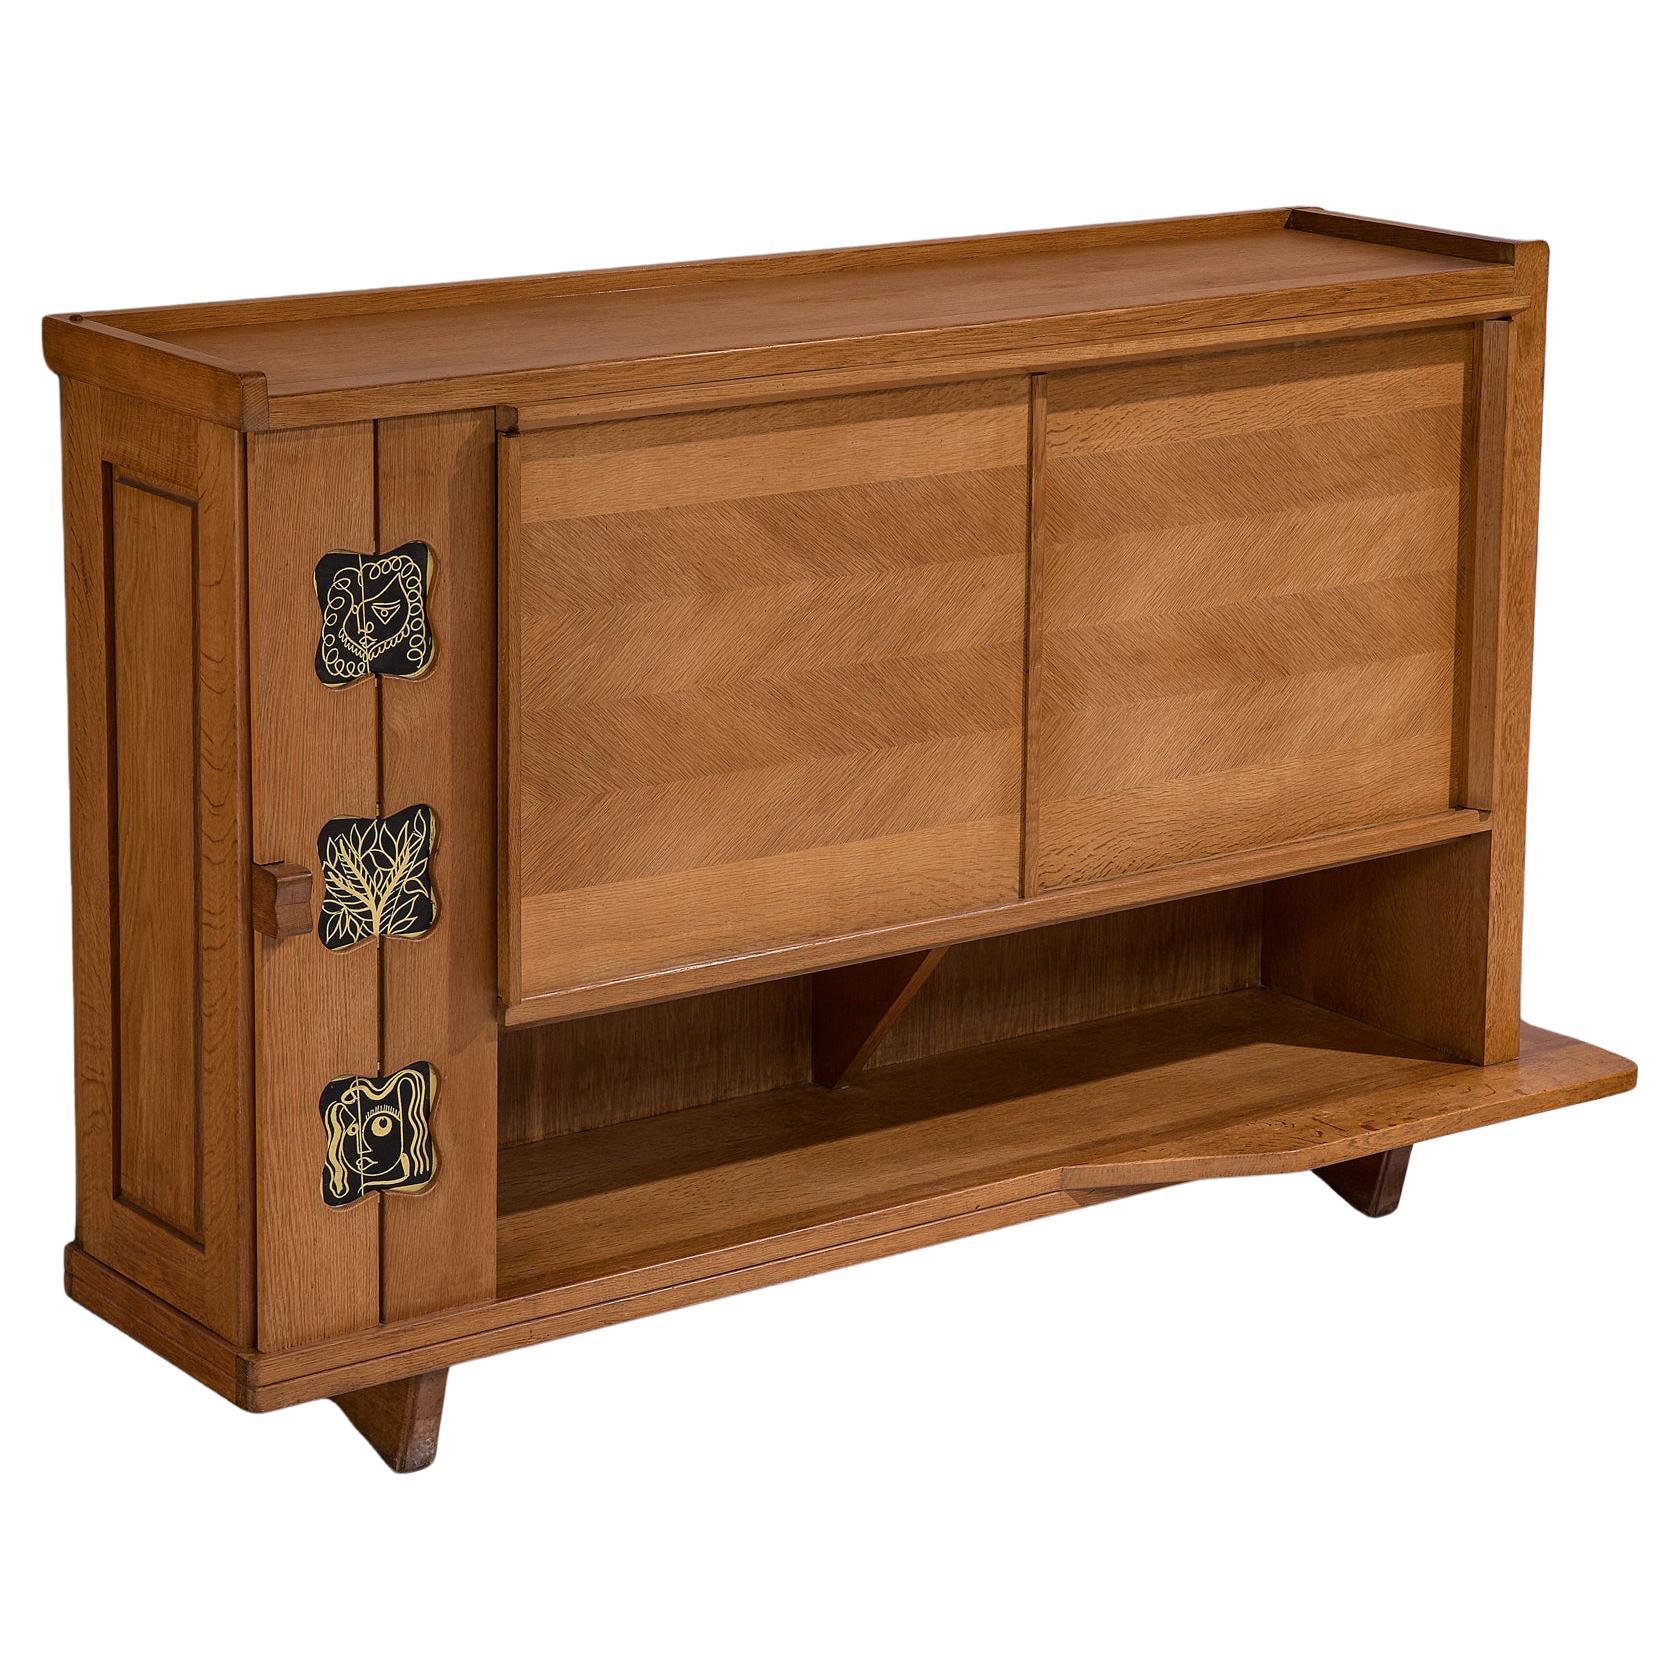 Guillerme & Chambron Buffet in Oak with Ceramic Details  For Sale